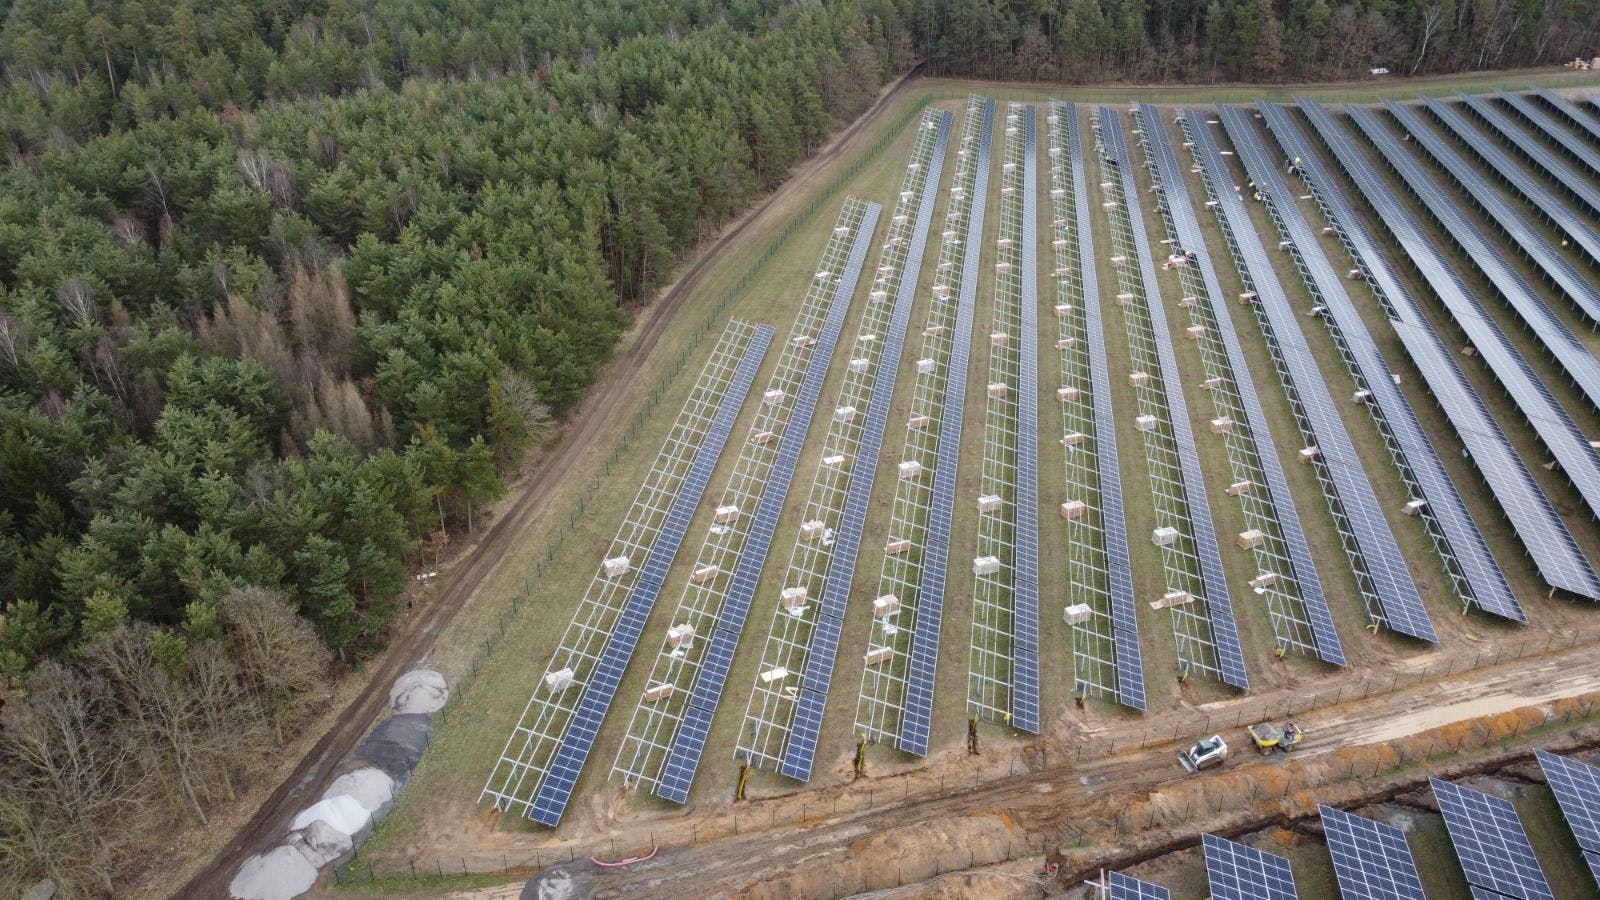 Mappach freefield PV from a bird's perspective